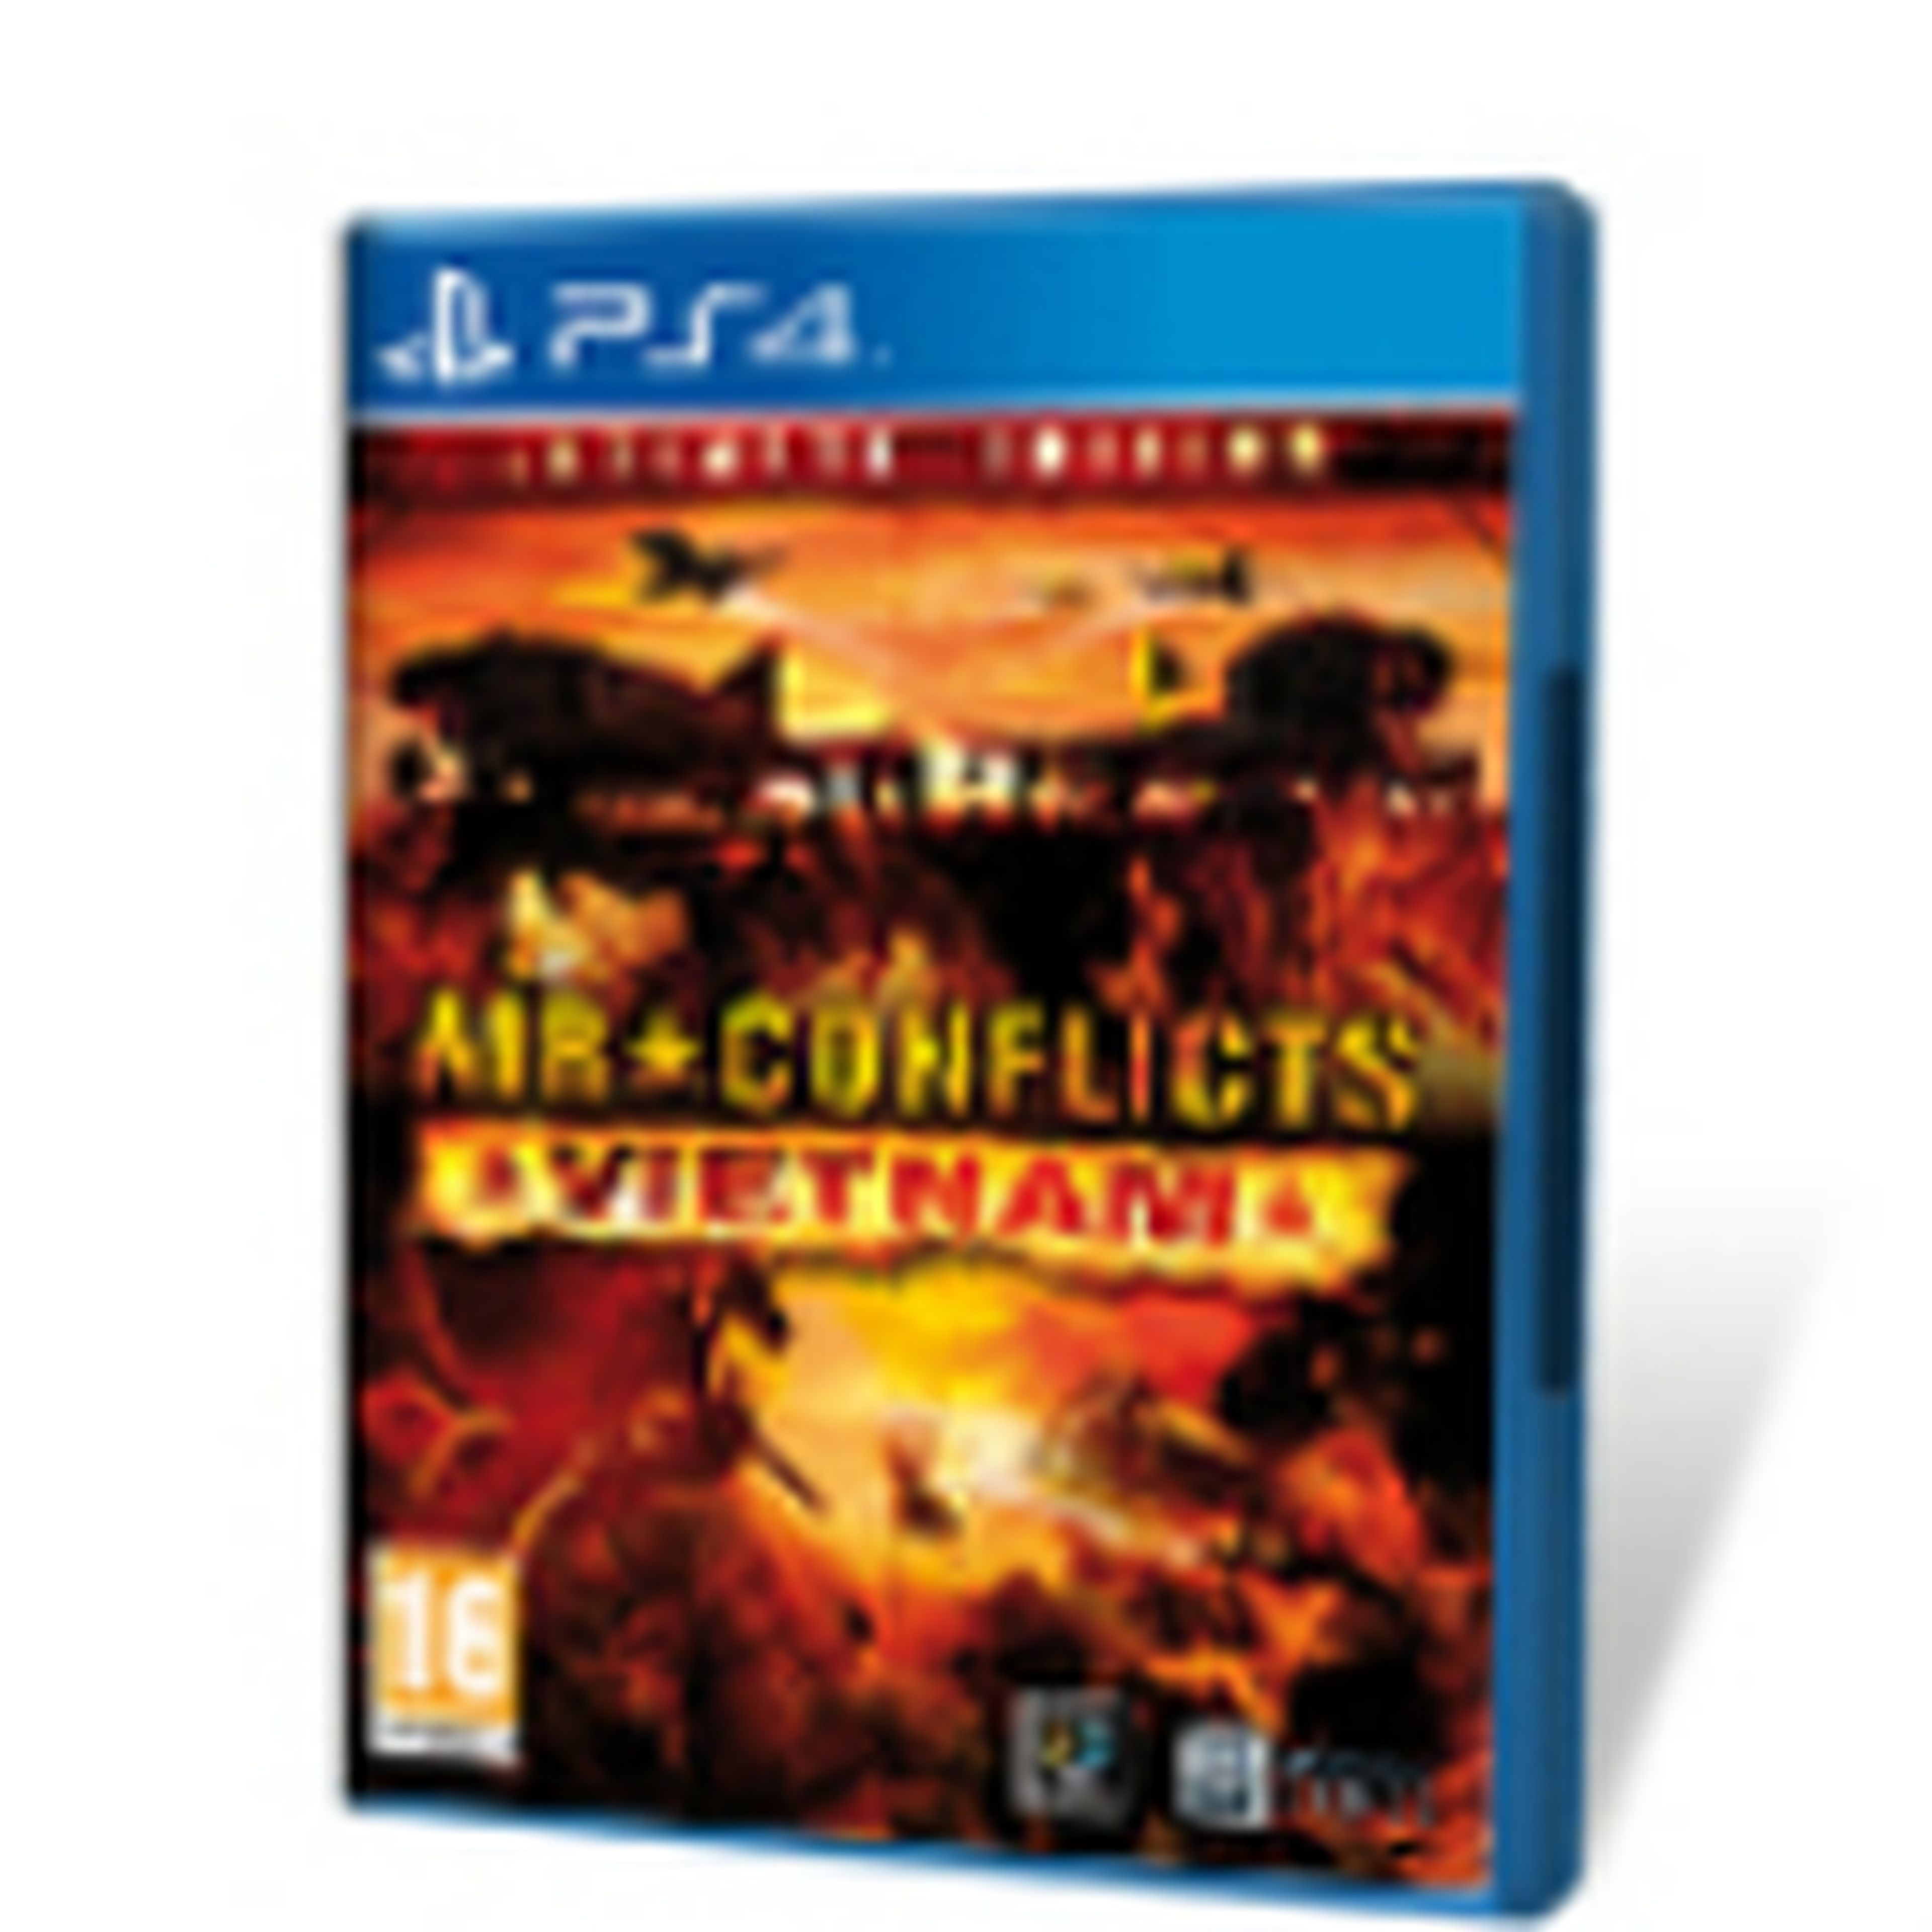 Air Conflicts Vietnam Ultimate Edition para PS4